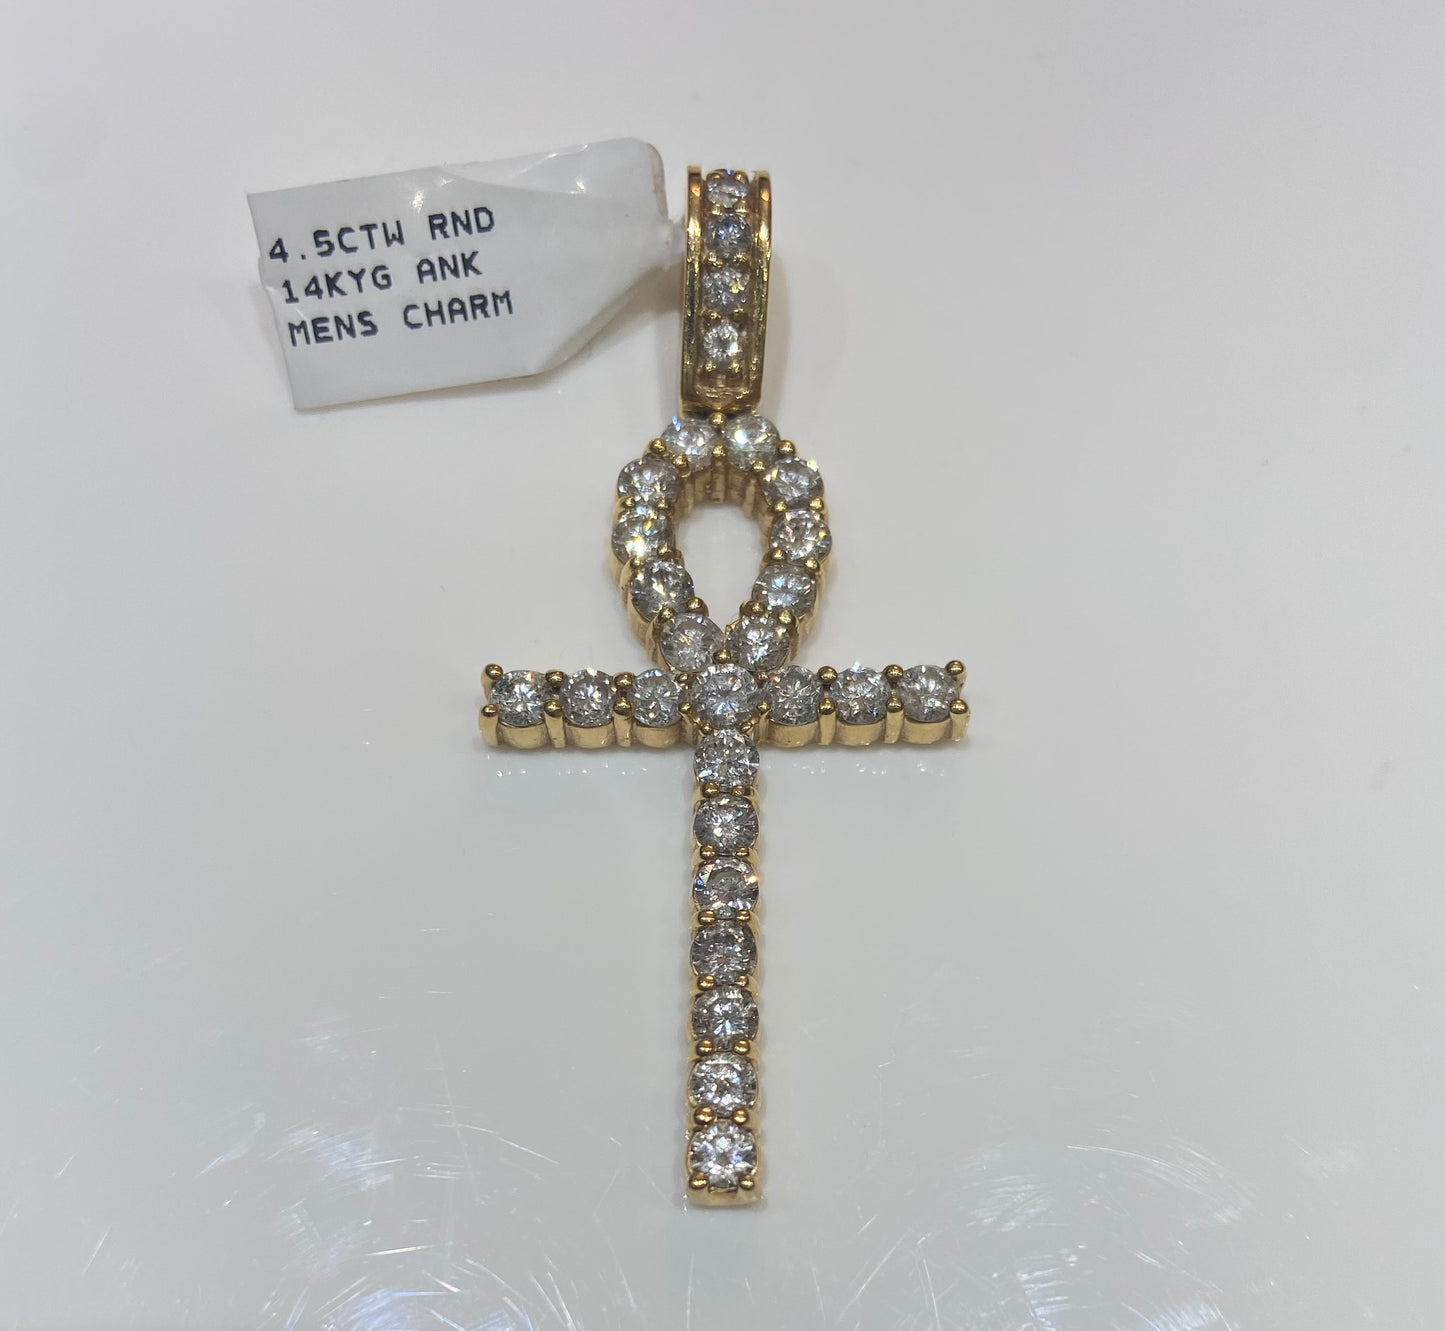 14K Yellow Gold 4.5CTW Rounds Ankh Charm